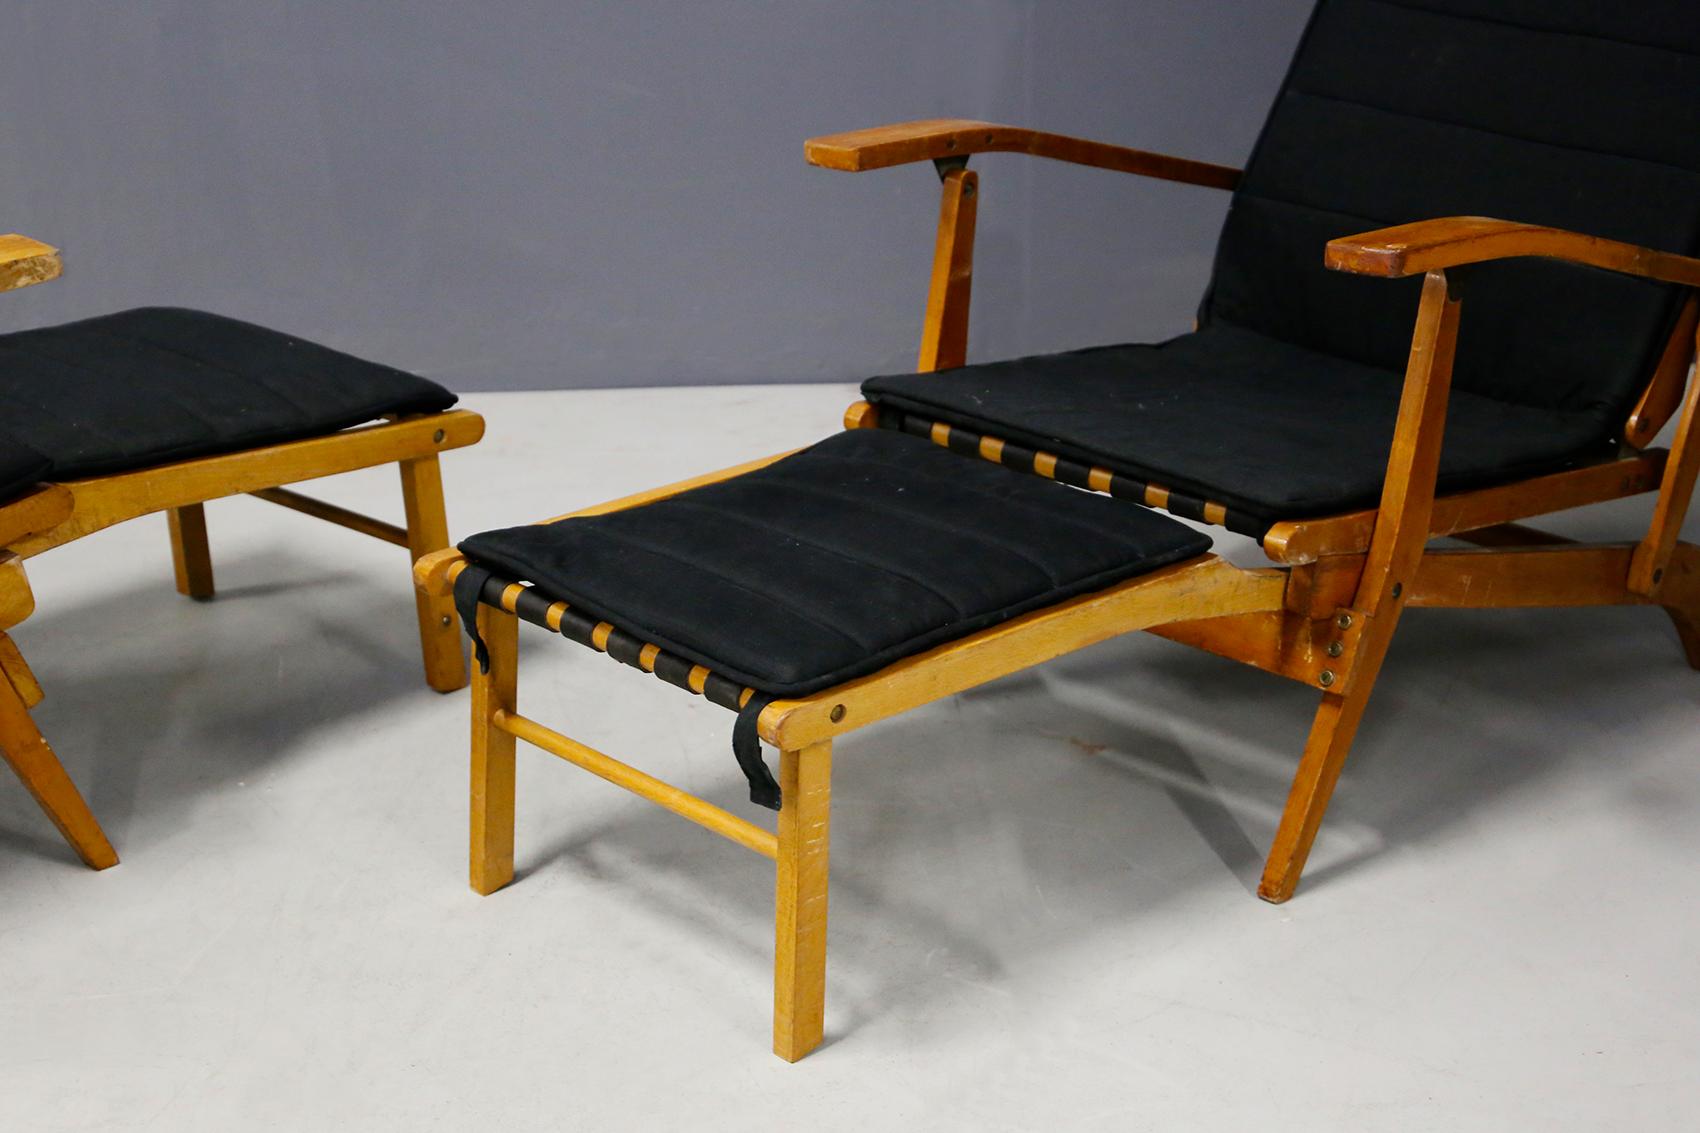 Pair of deckchairs attributed to Studio BBPR from 1950. The chairs are made of cherrywood. Inside them we find an interlocking mechanism that allows the exit of the stool / ottoman. The stool through the interlocking is easily closable right the